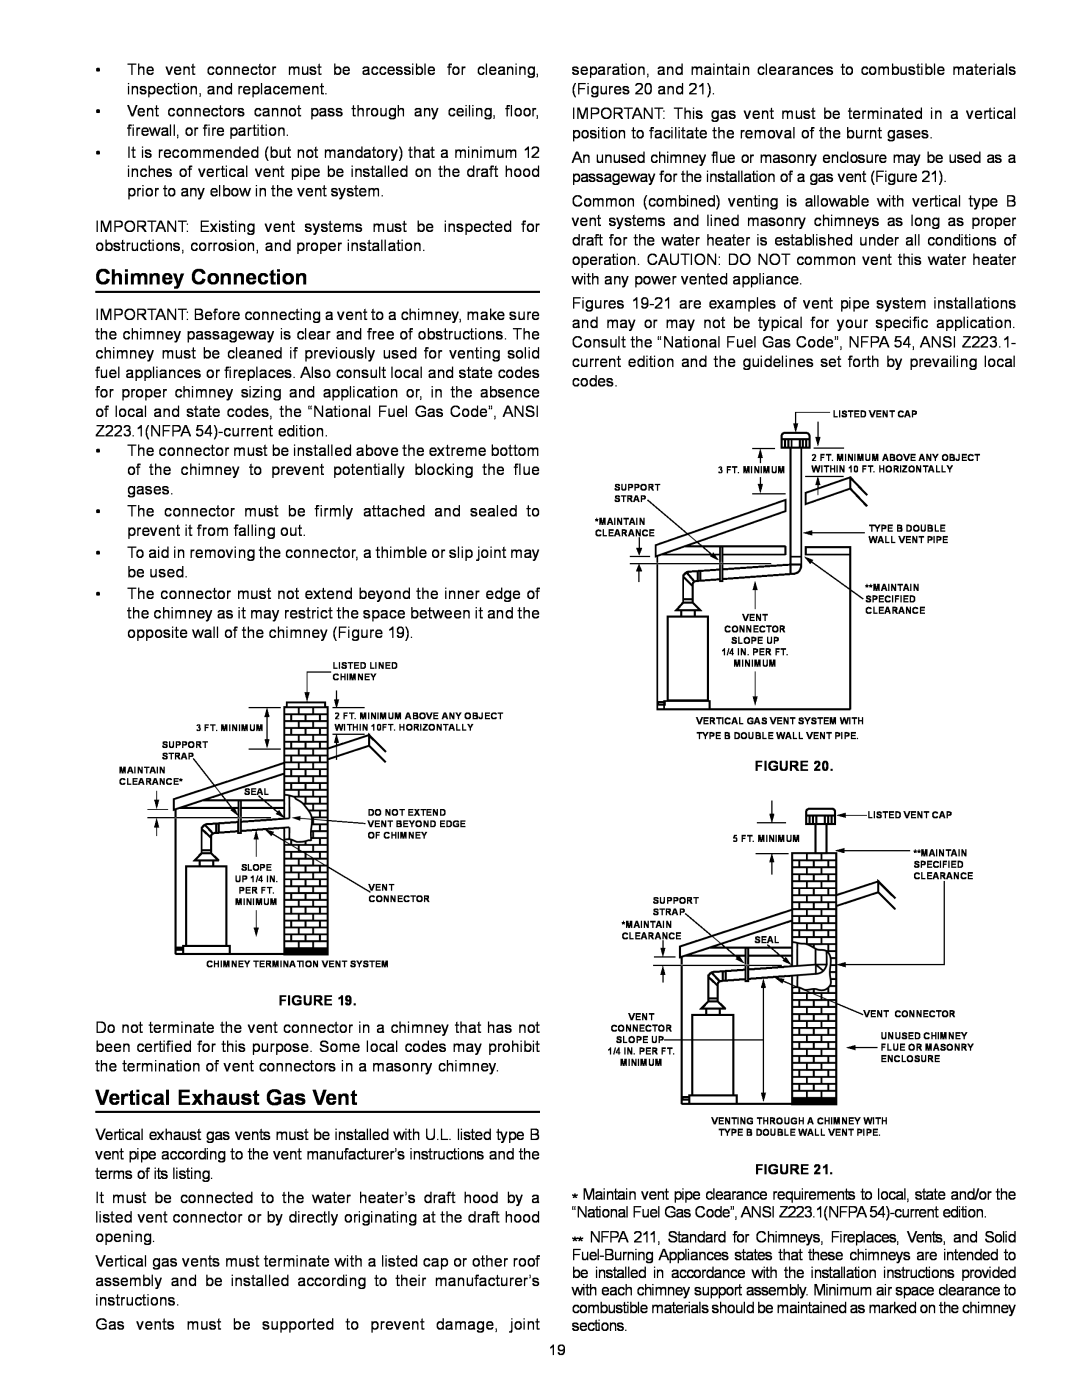 Kenmore 153.331572 owner manual Chimney Connection, Vertical Exhaust Gas Vent 